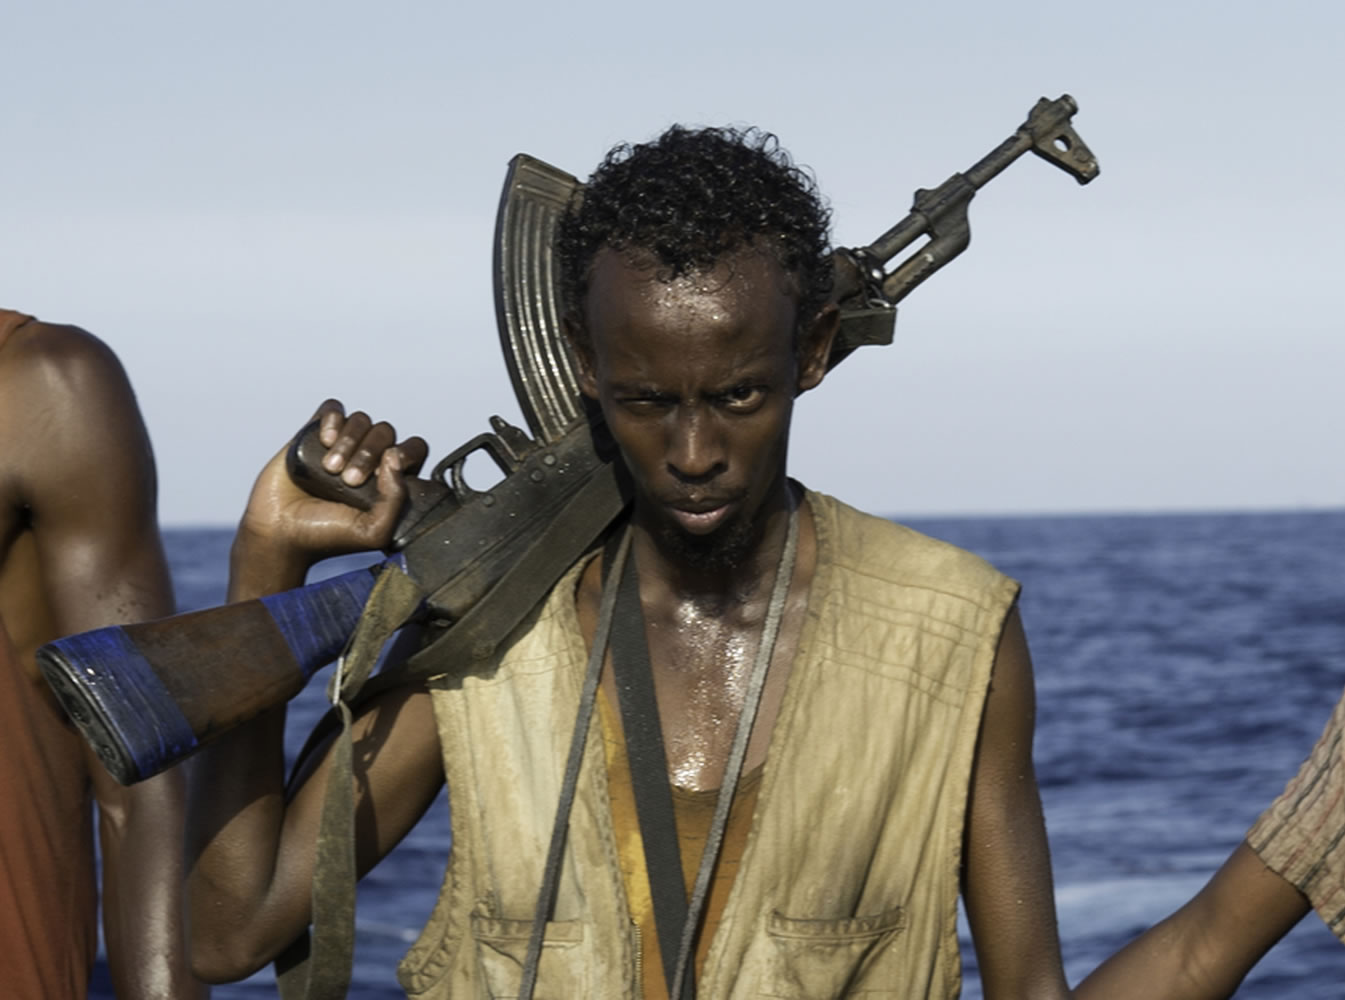 Barkhad Abdi in a scene from the film, &quot;Captain Phillips. Abdi was nominated for an Academy Award for best supporting actor for his role in the film.